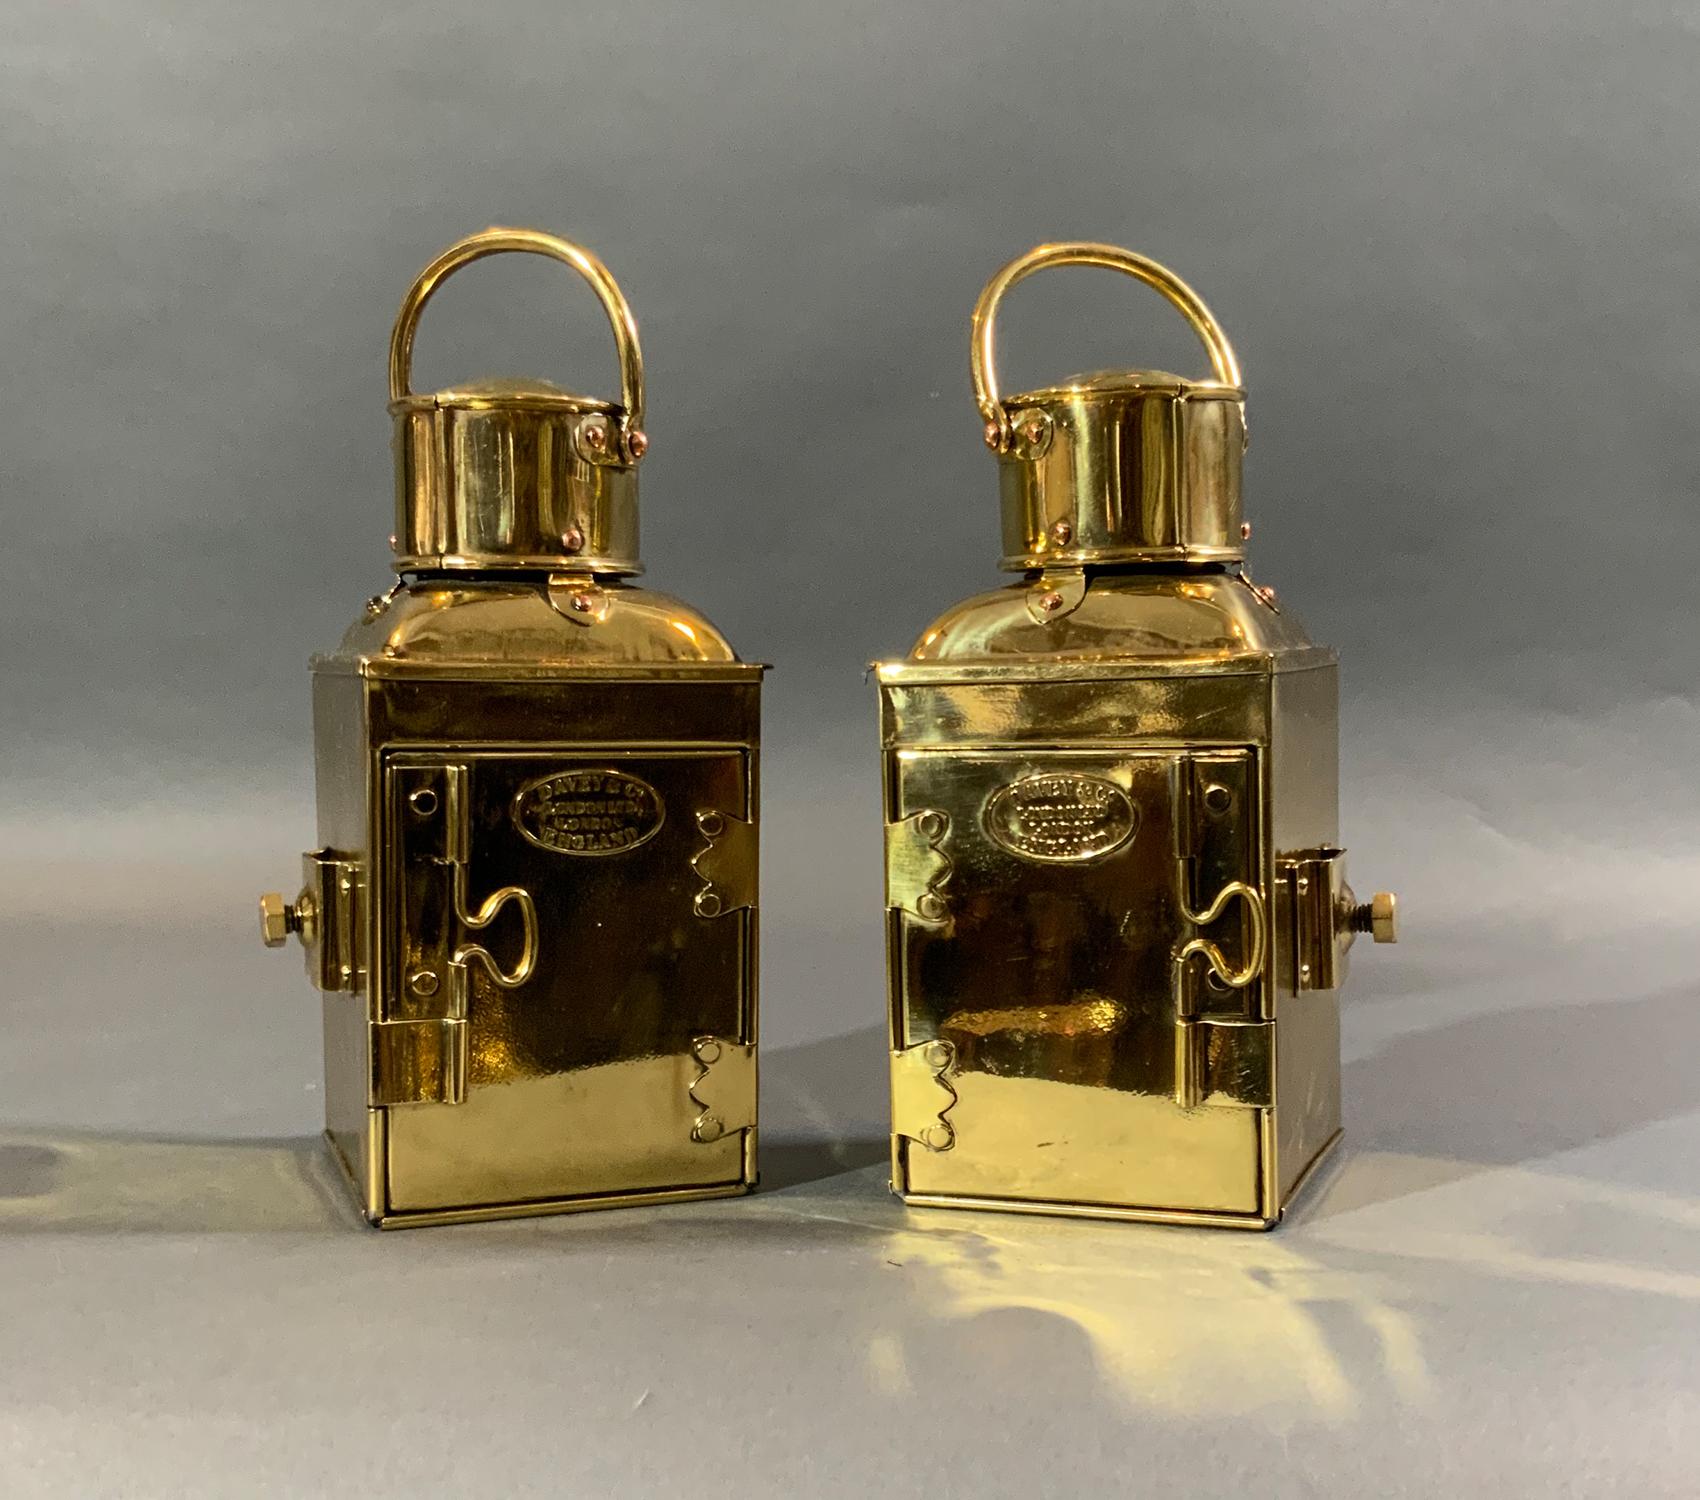 Polished Solid Brass Port and Starboard Boat Lanterns For Sale